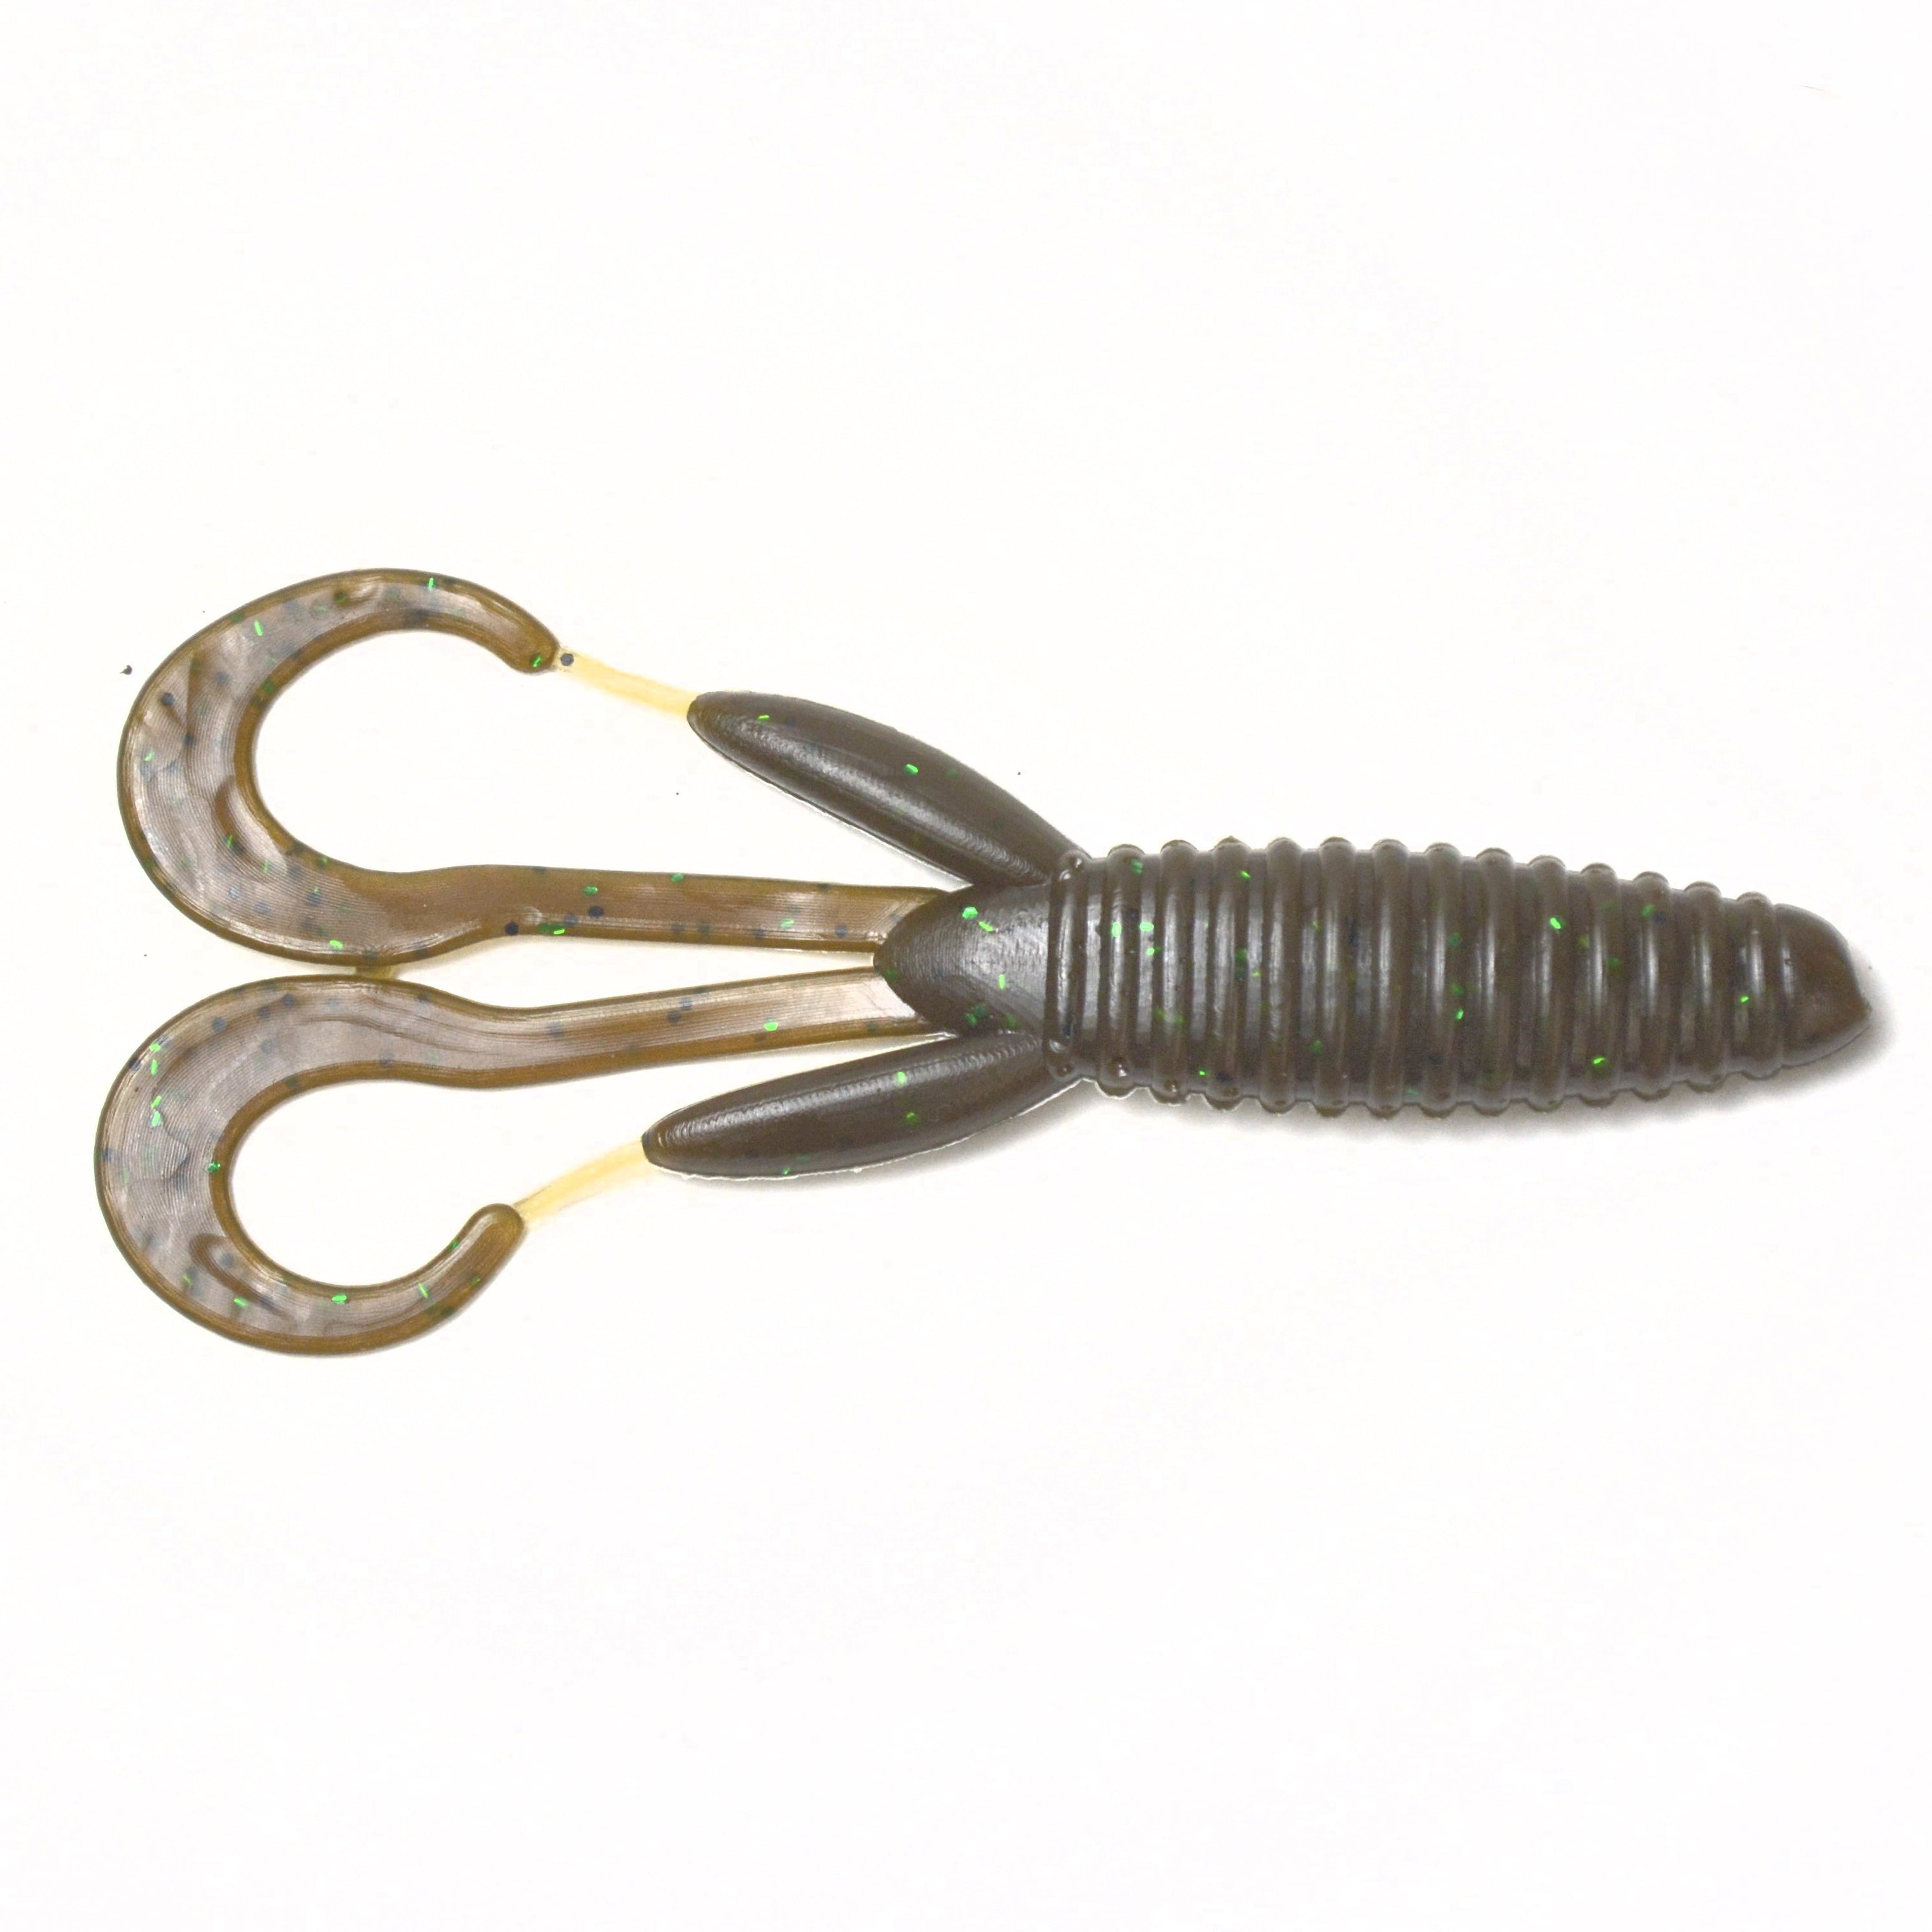 Soft Plastic Lure Made by Basf Material with Perfect Action